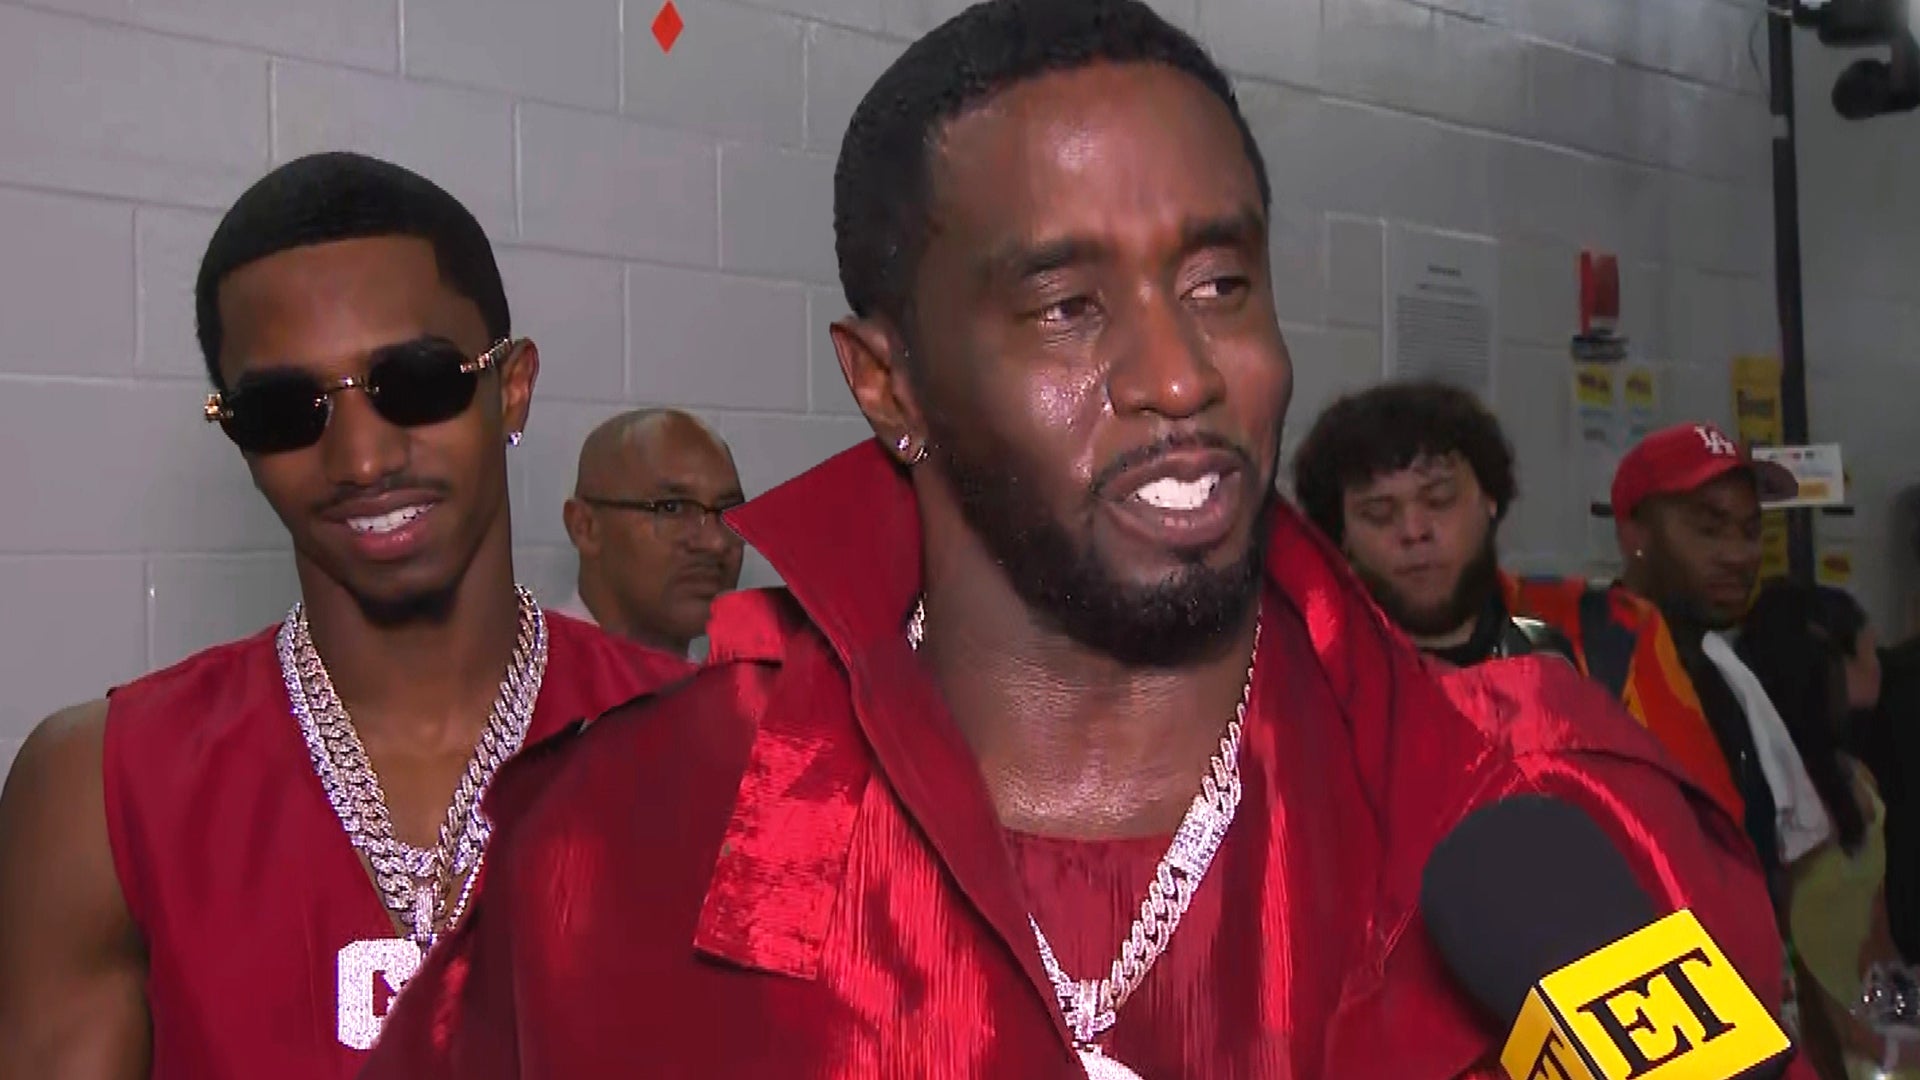 Diddy Reflects on Late Ex Kim Porter After Rocking the Stage With Son King Combs at VMAs (Exclusive)